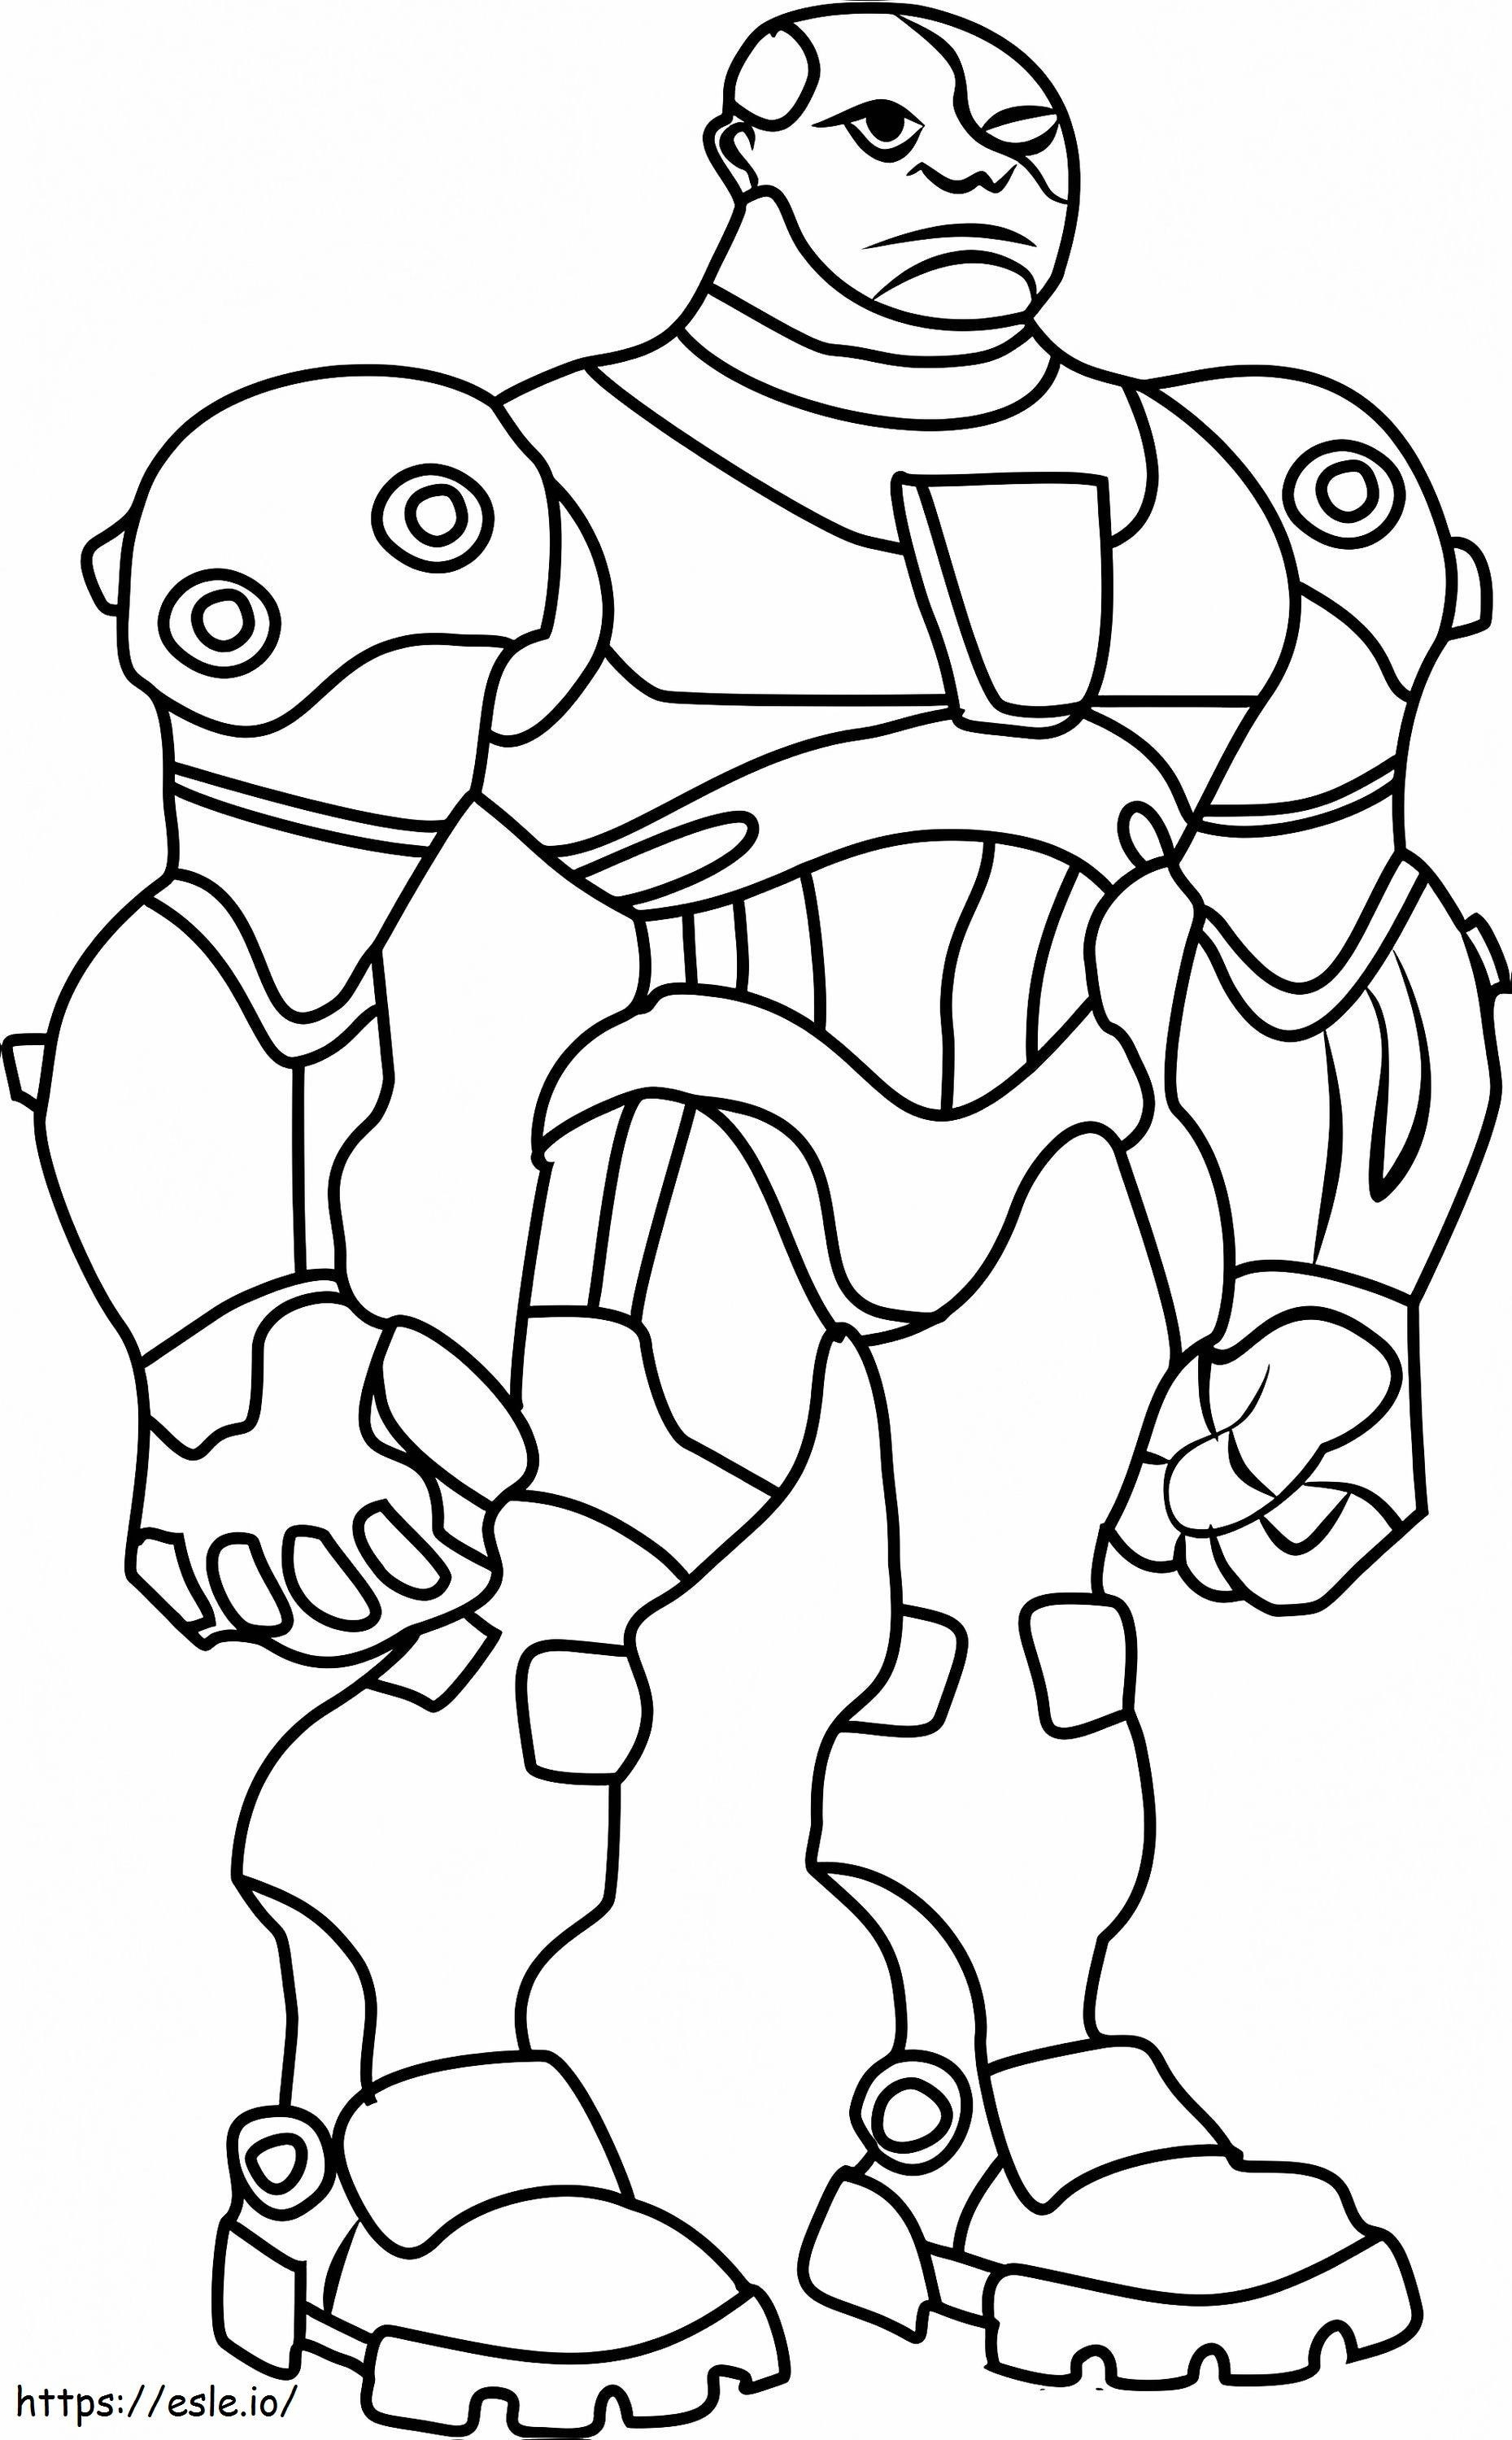 Cyborg1 coloring page